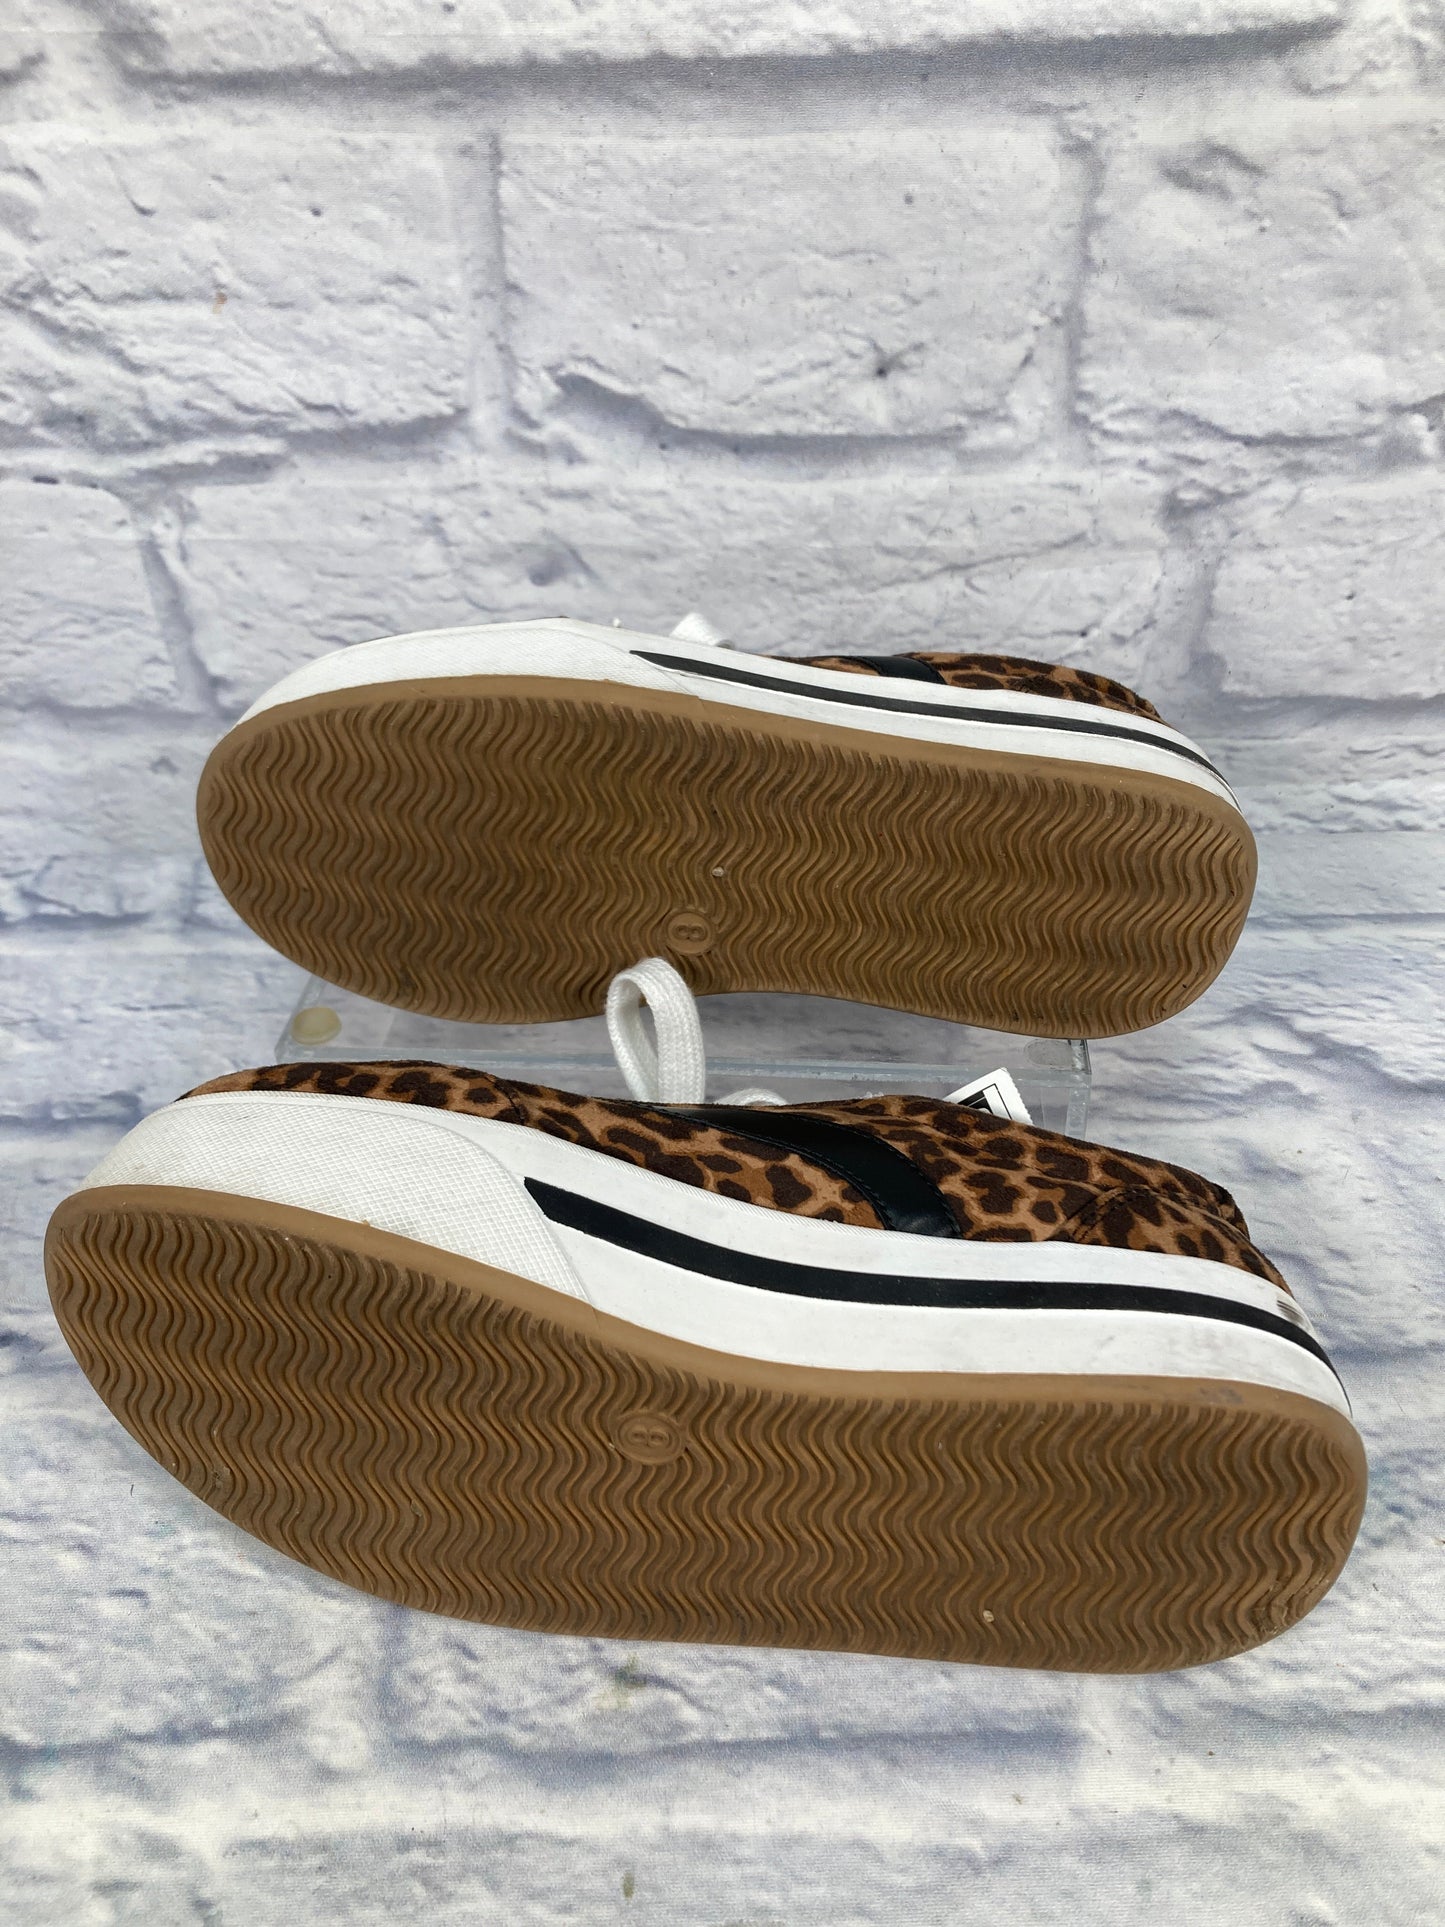 Animal Print Shoes Sneakers Platform Clothes Mentor, Size 8